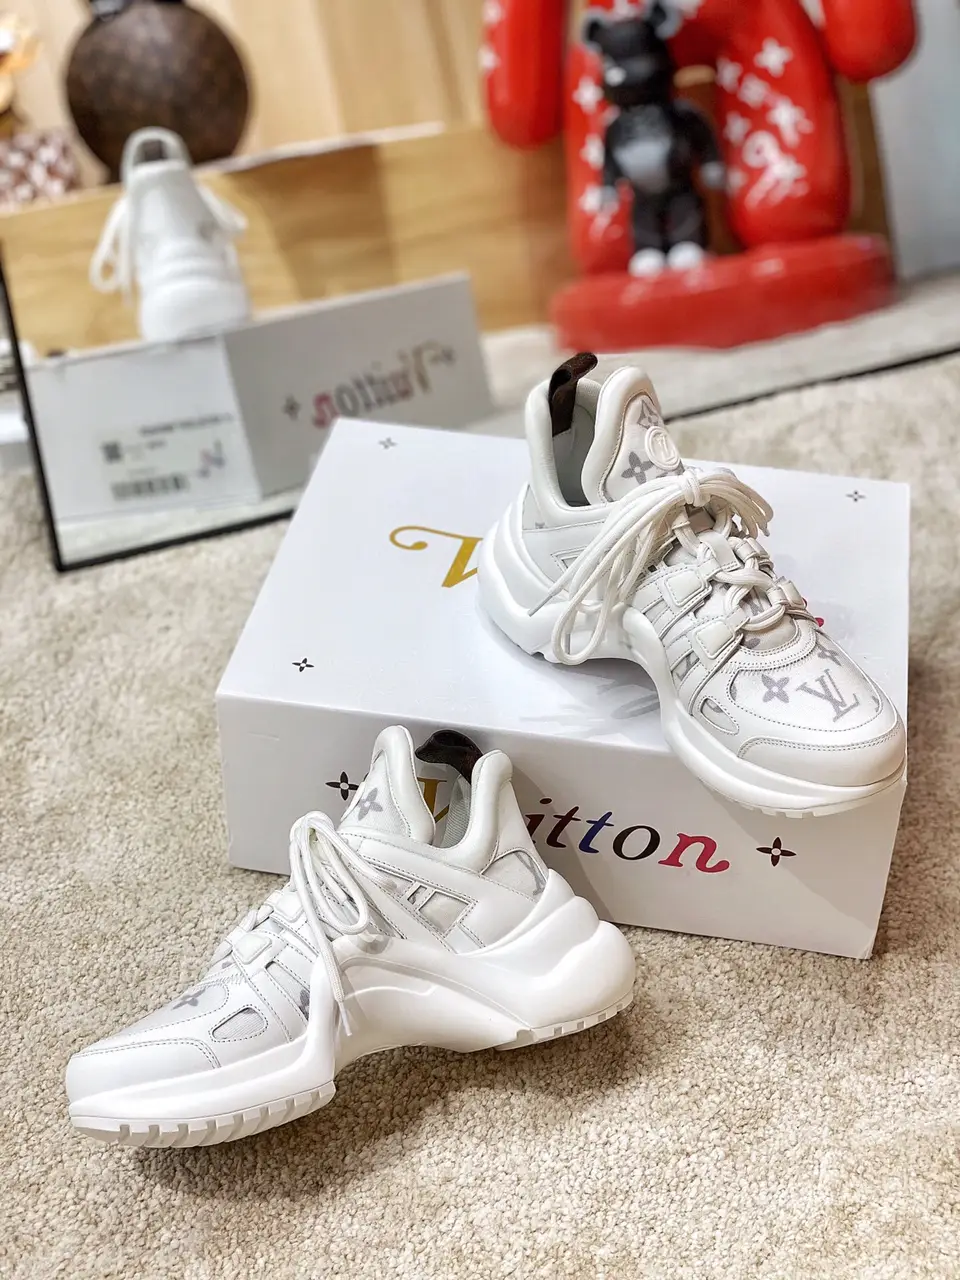 Fake Vs Real Lous Vuitton Archlight Trainers !! Did you find this help